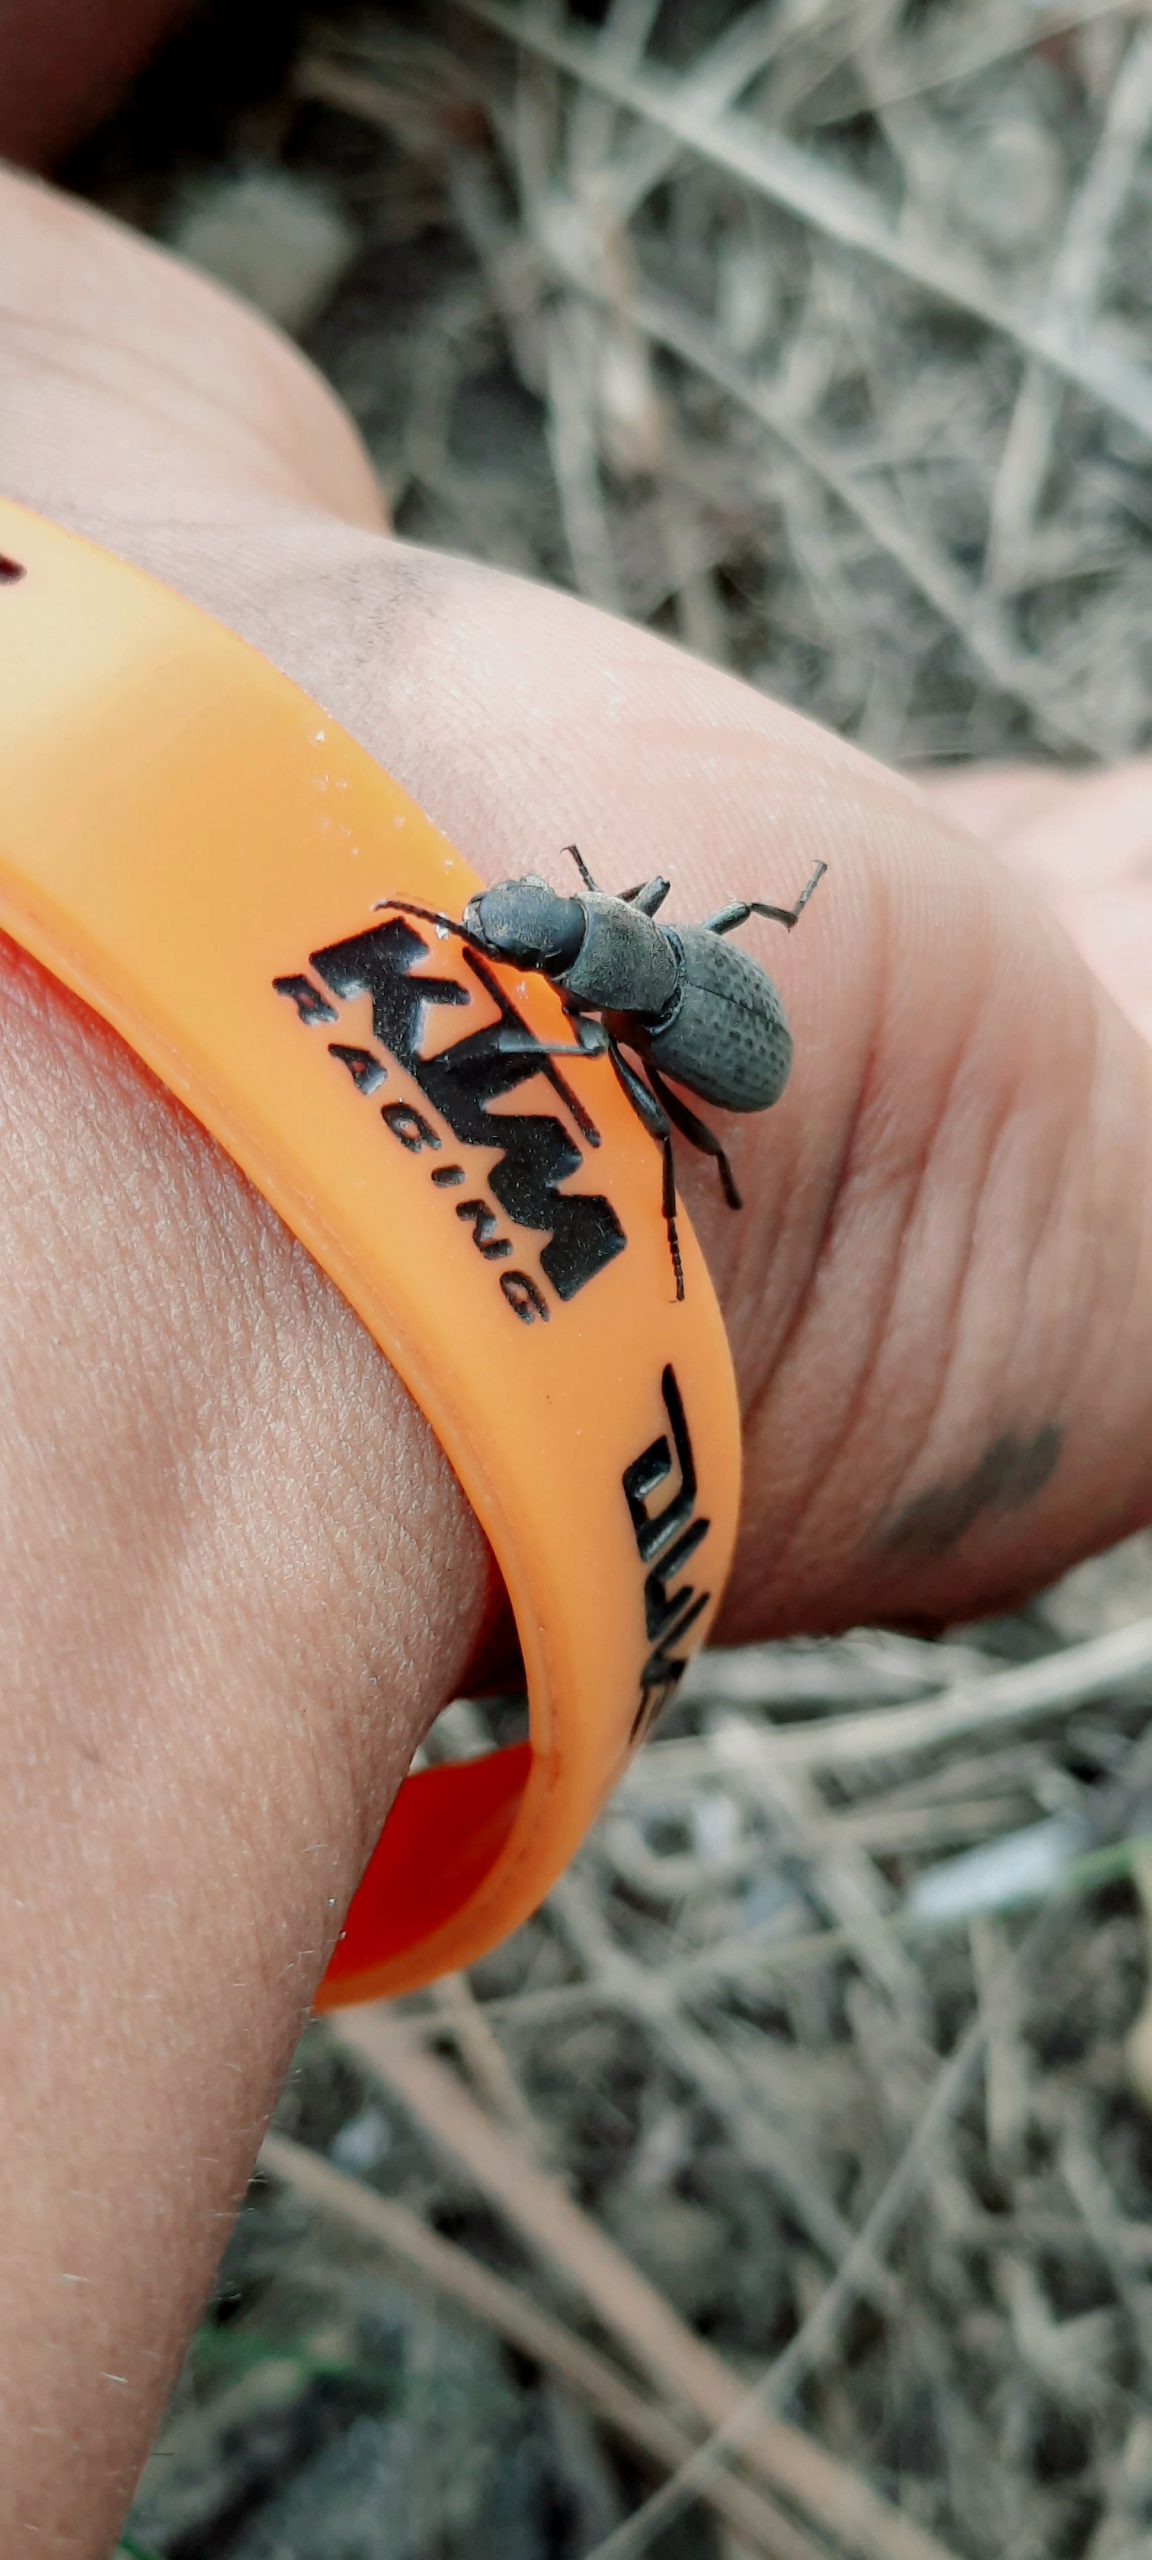 Pinacate beetle on a hand